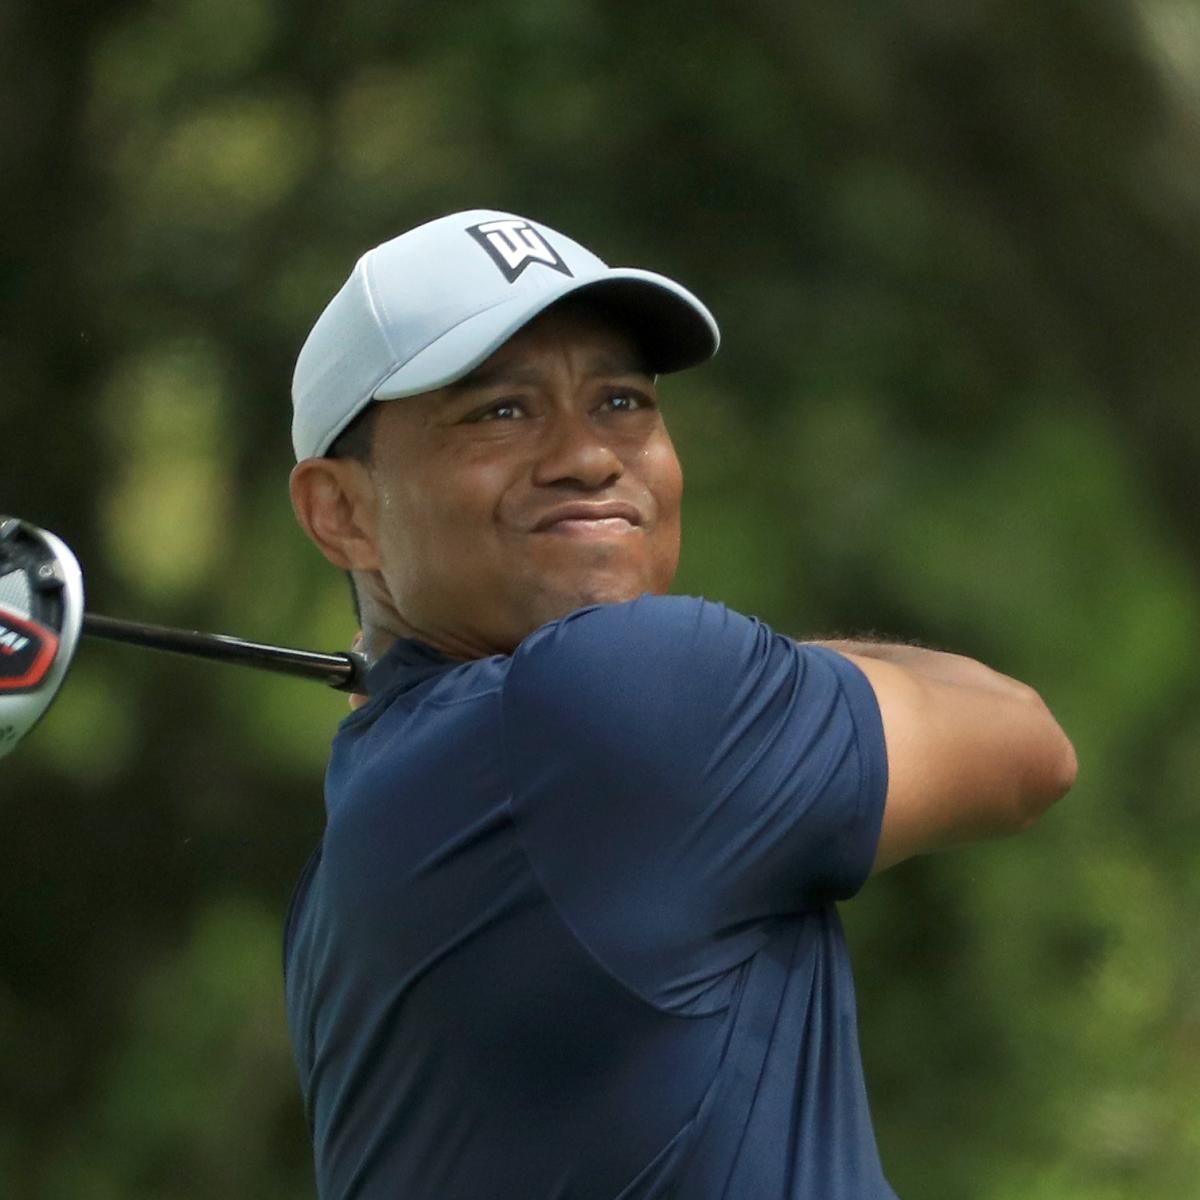 Tiger Woods Near the Top of Leaderboard After Strong 1st Round at 2019 Masters ...